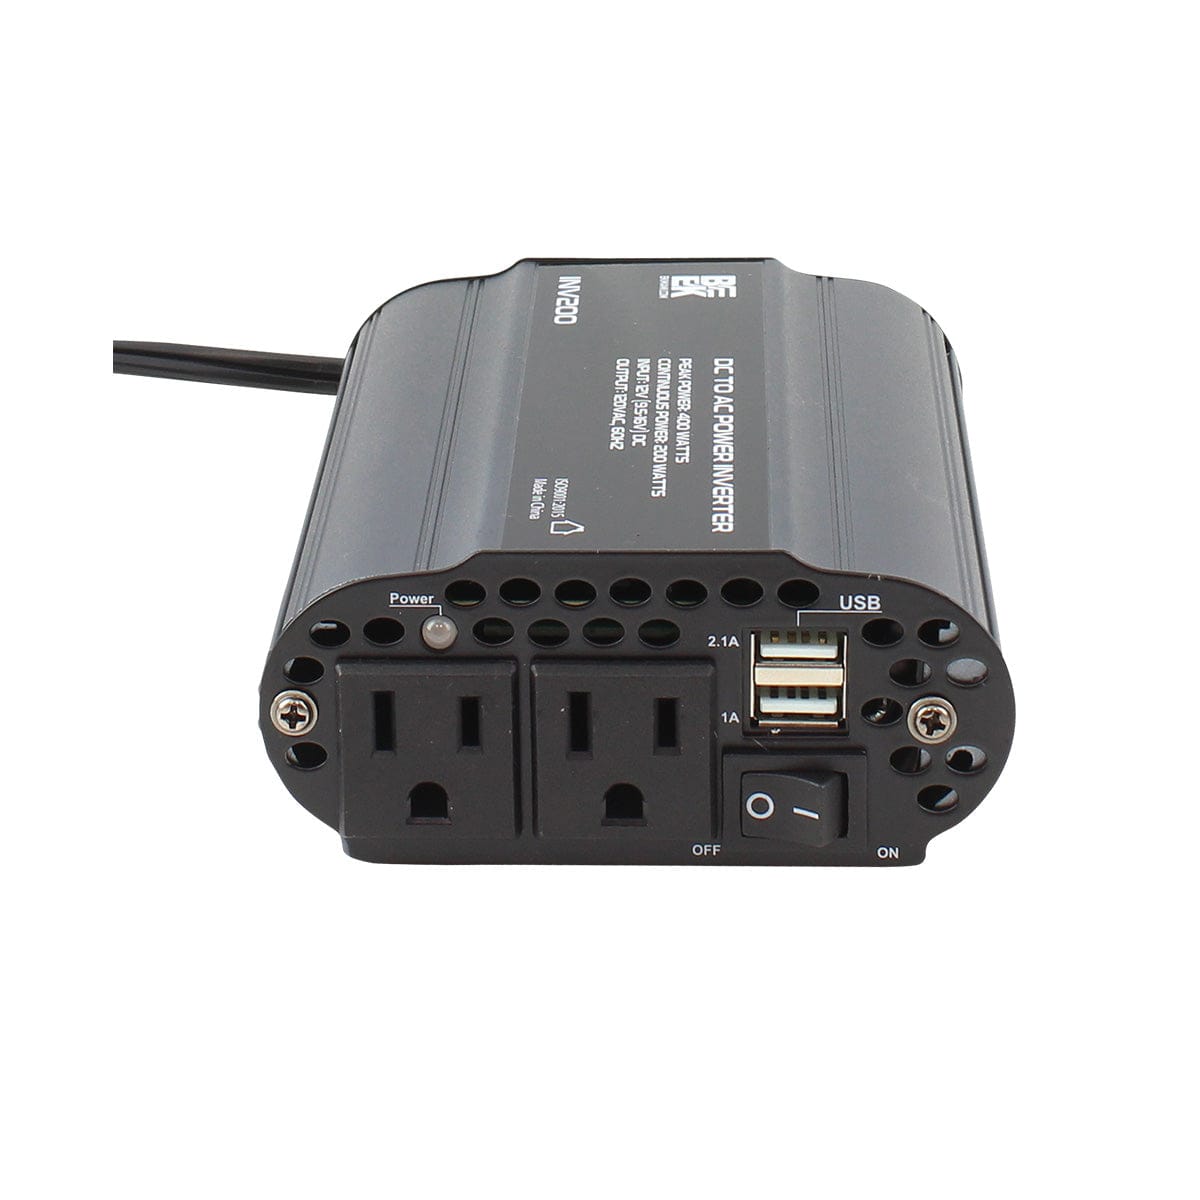 DC to AC Power Inverter 400 Watts Peak Power  This portable inverter enables users to charge various devices, such as smart phones, tablets, etc-INV200